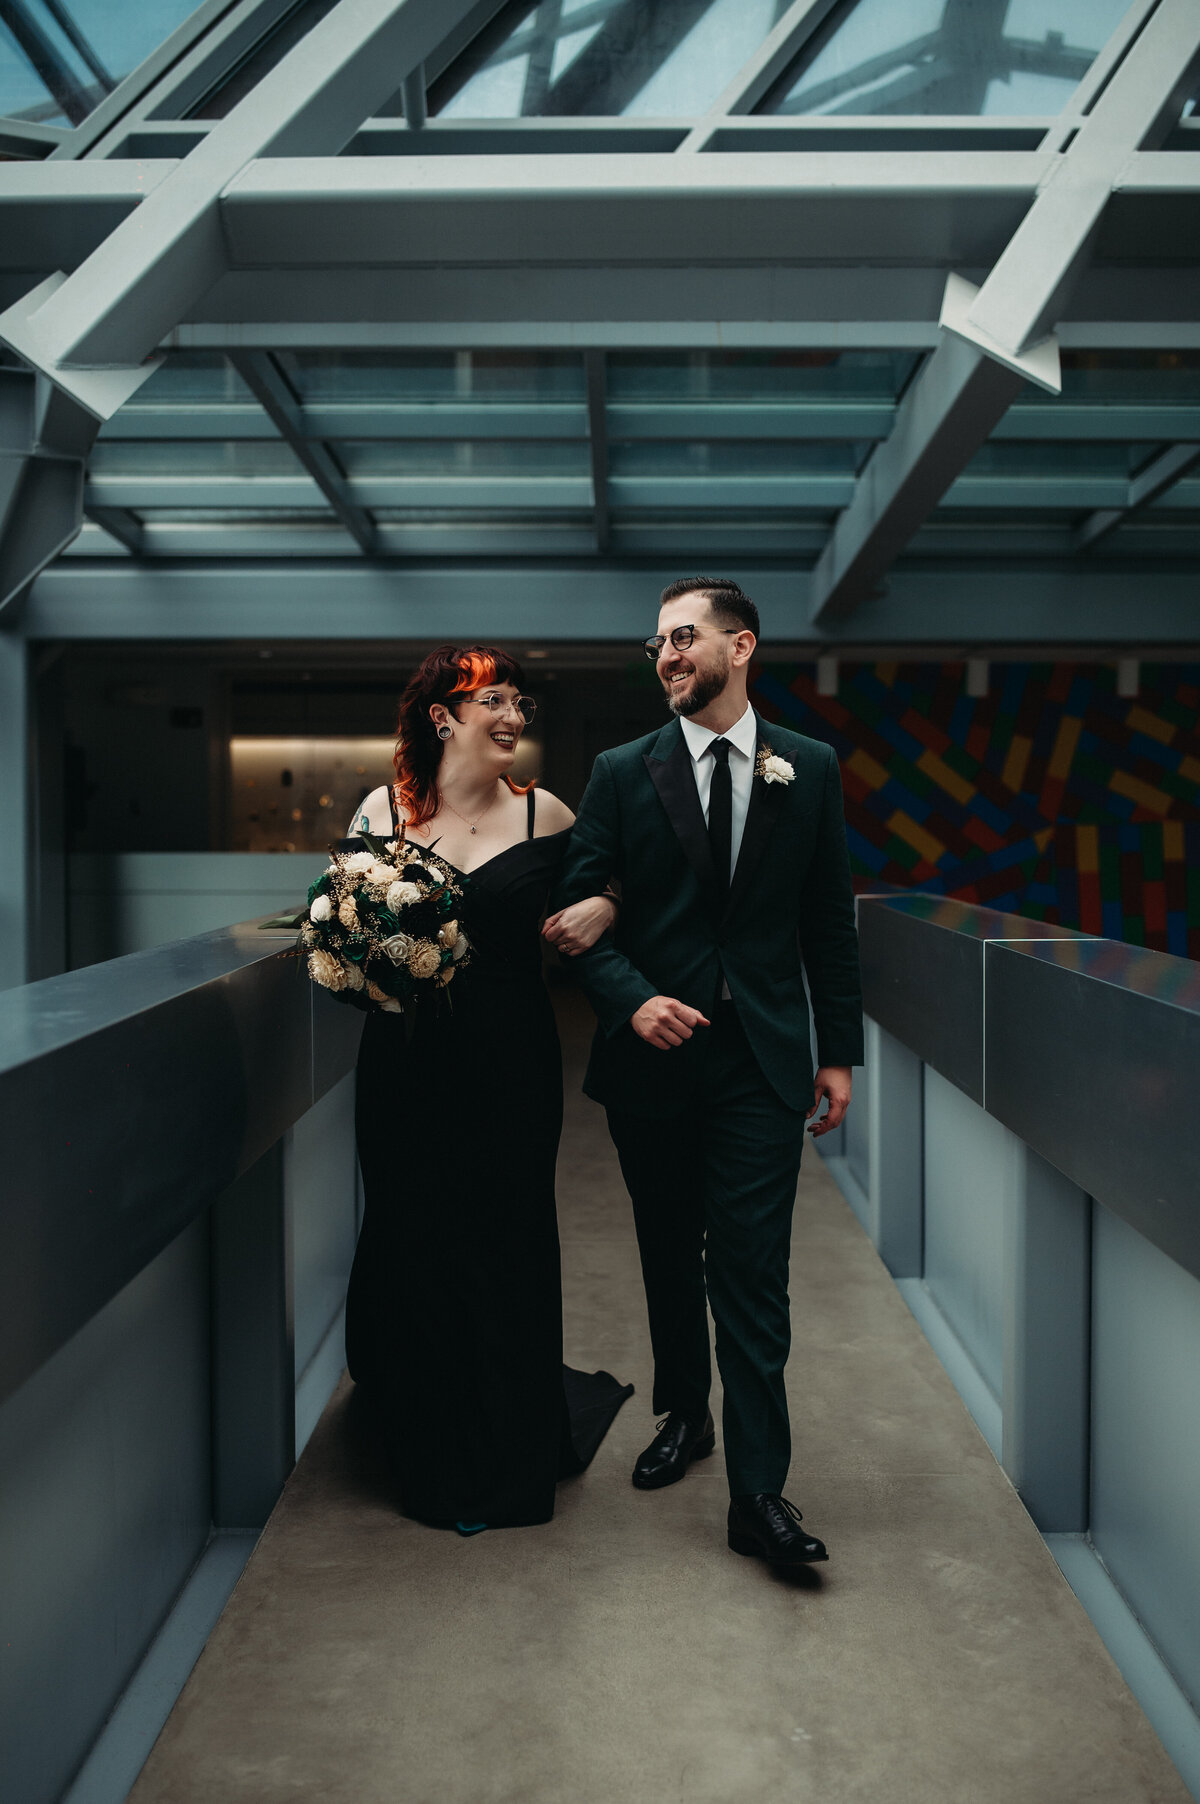 Bride in black dress walks with her partner wearing a dark green suit at the art museum in Akron.